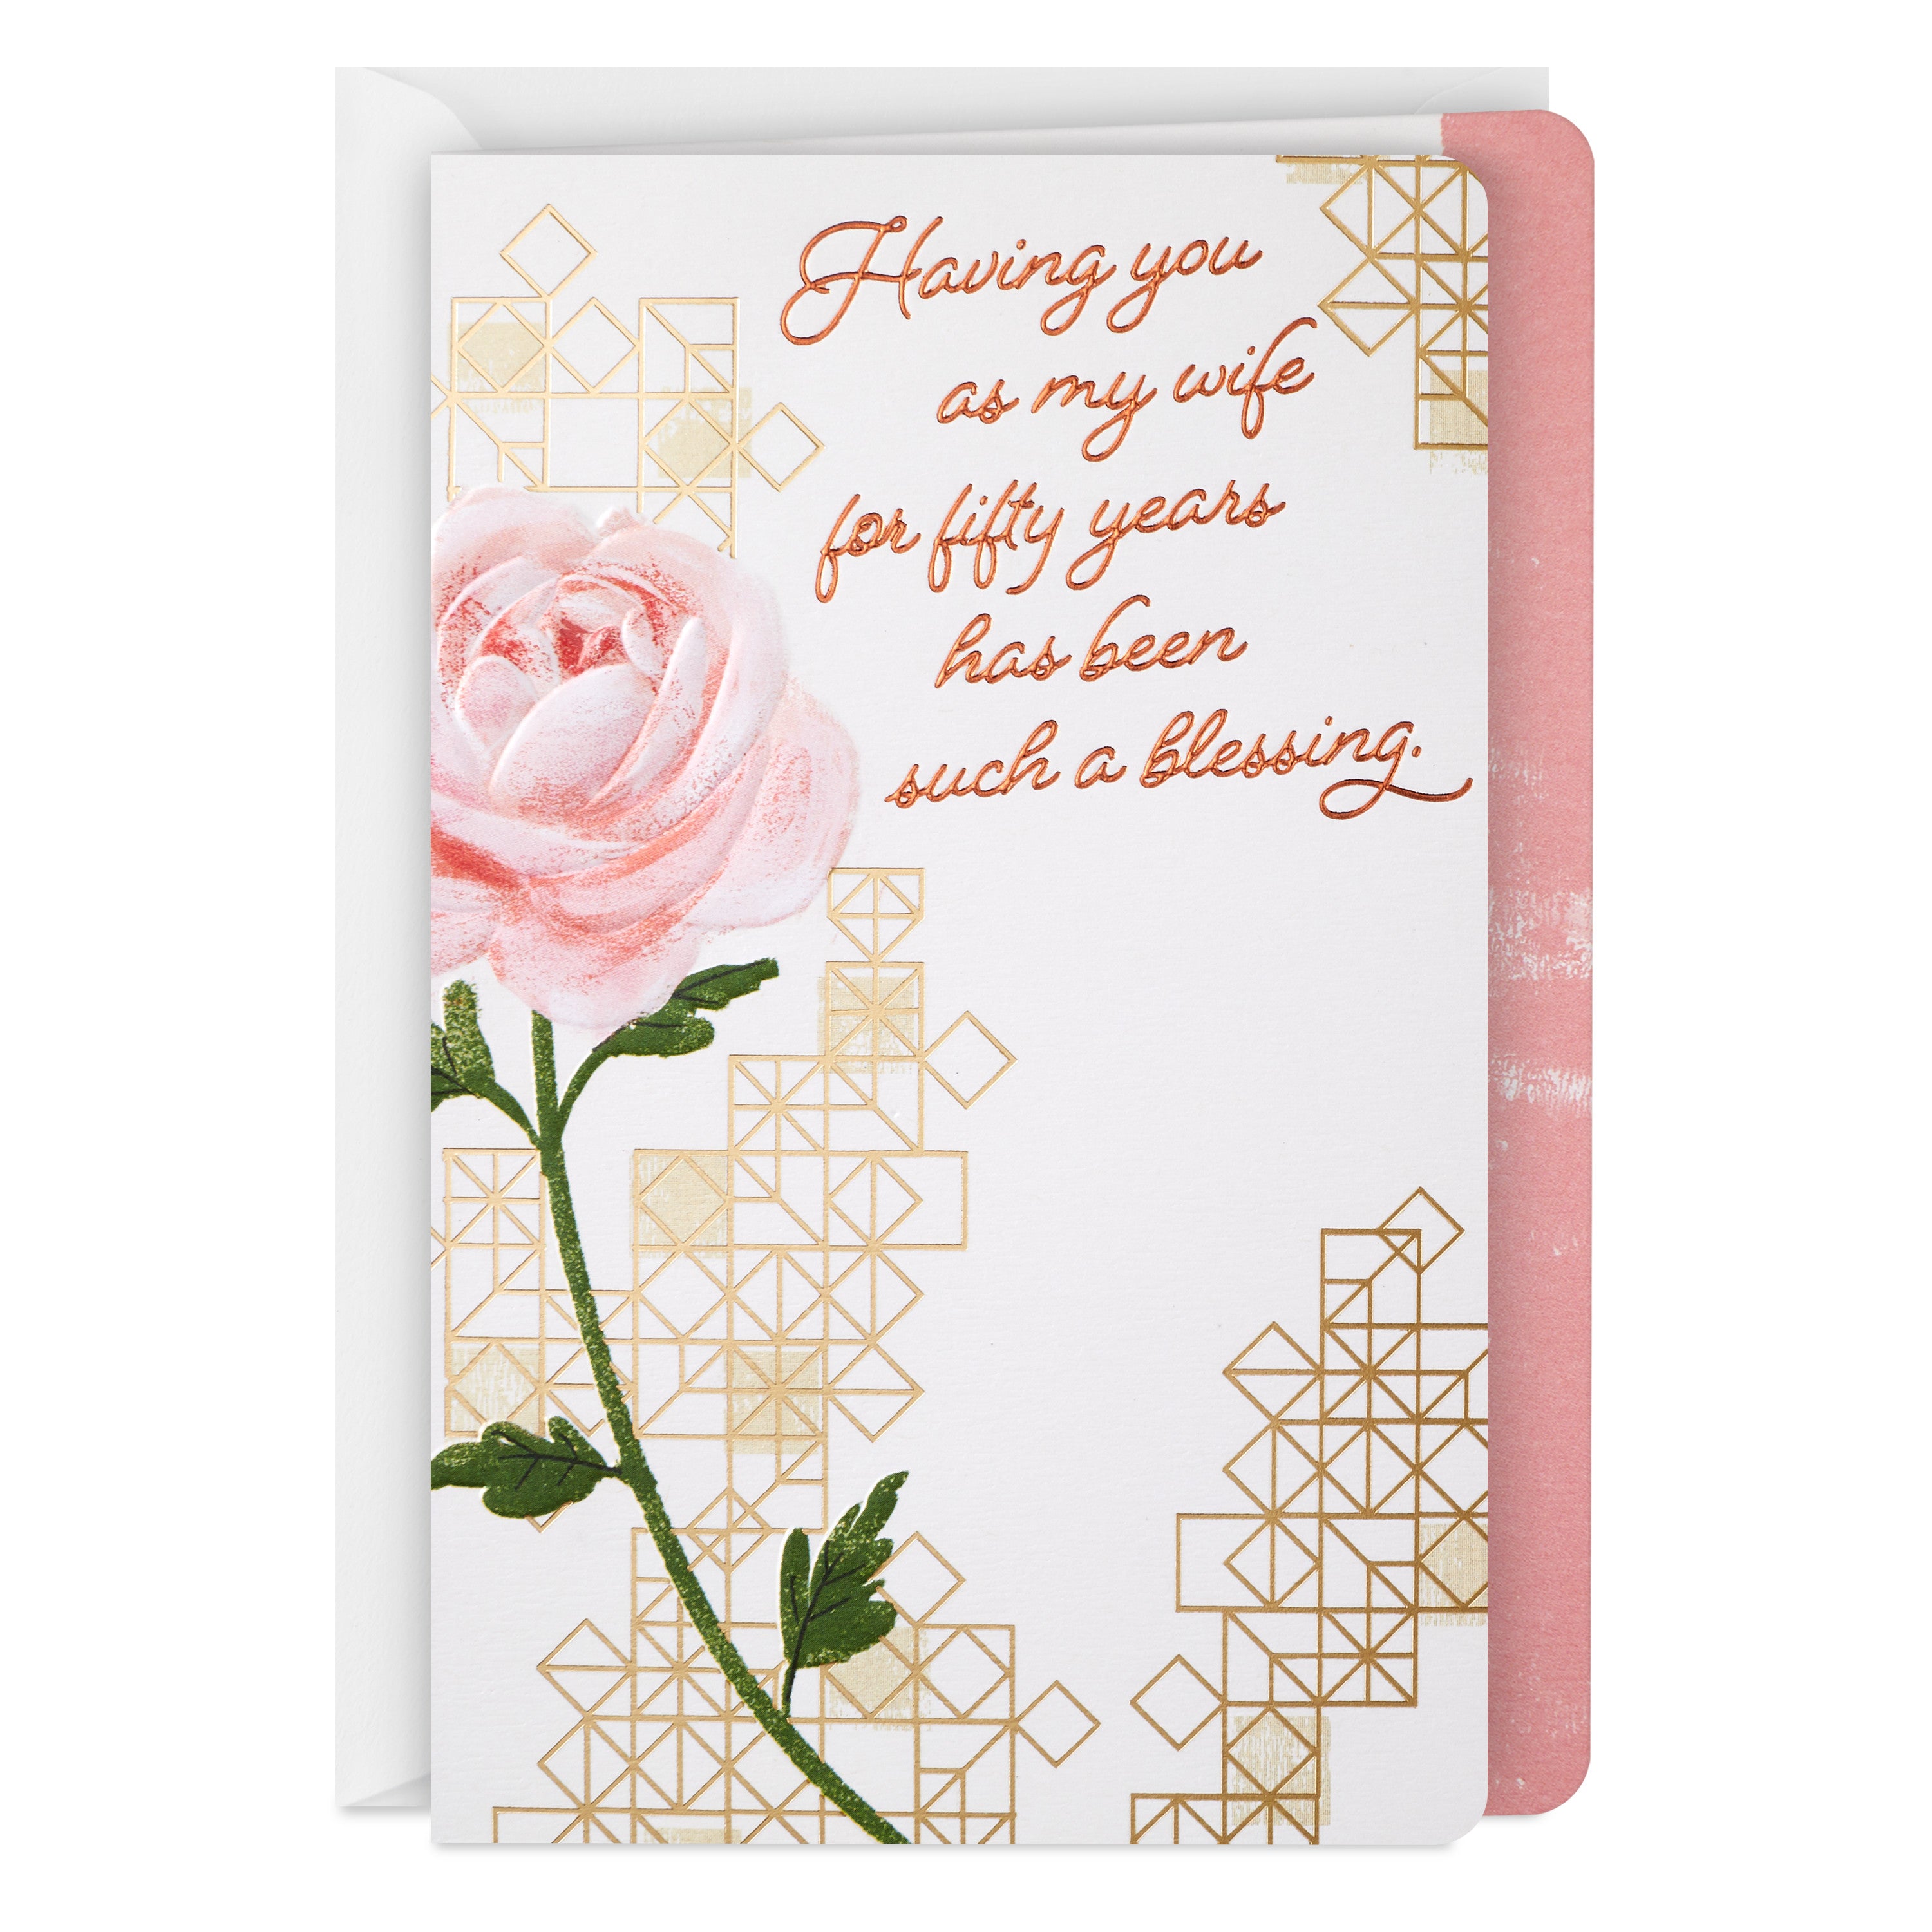 Hallmark Religious 50th Anniversary Card for Wife (Blessing)